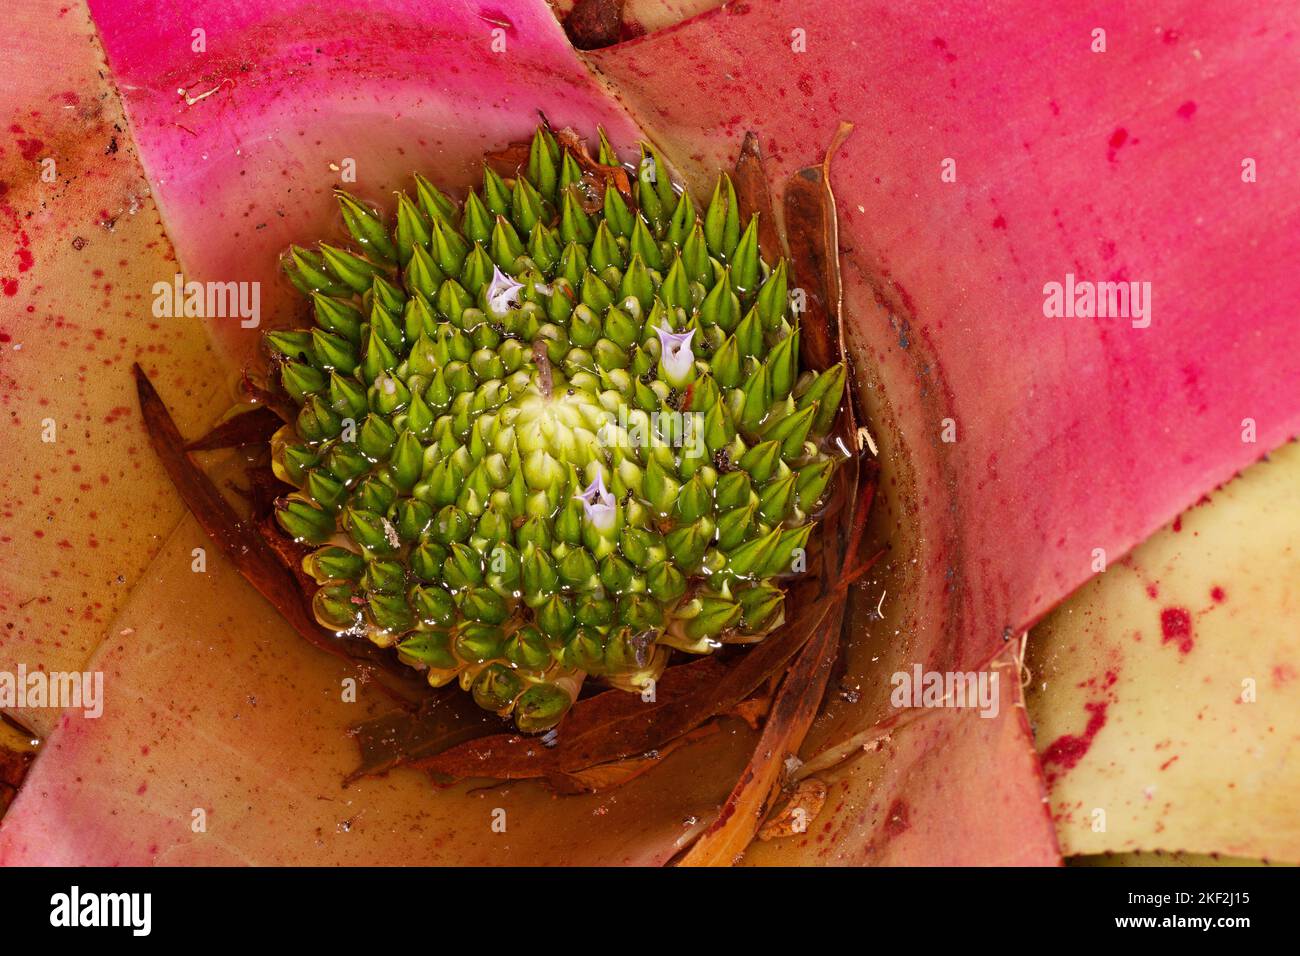 Neoregelia carolinae or Blushing Bromeliad is a species in the genus Neoregelia. It is noted for its centre turning red when it's about to flower. Nat Stock Photo